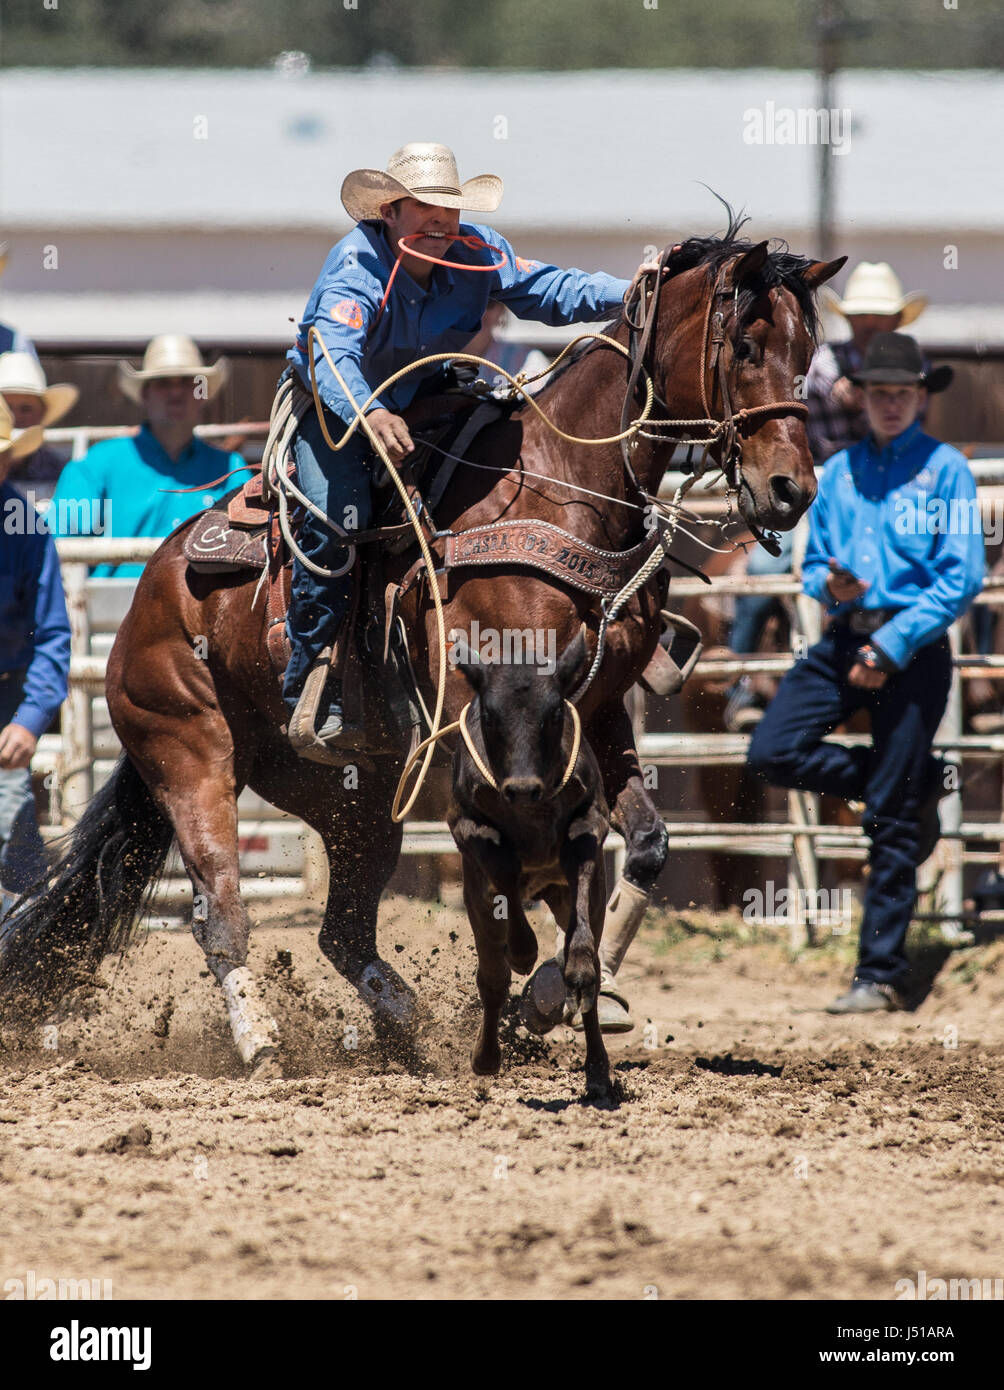 Calf roping cowboy at the rodeo in Cottonwood, California. Stock Photo